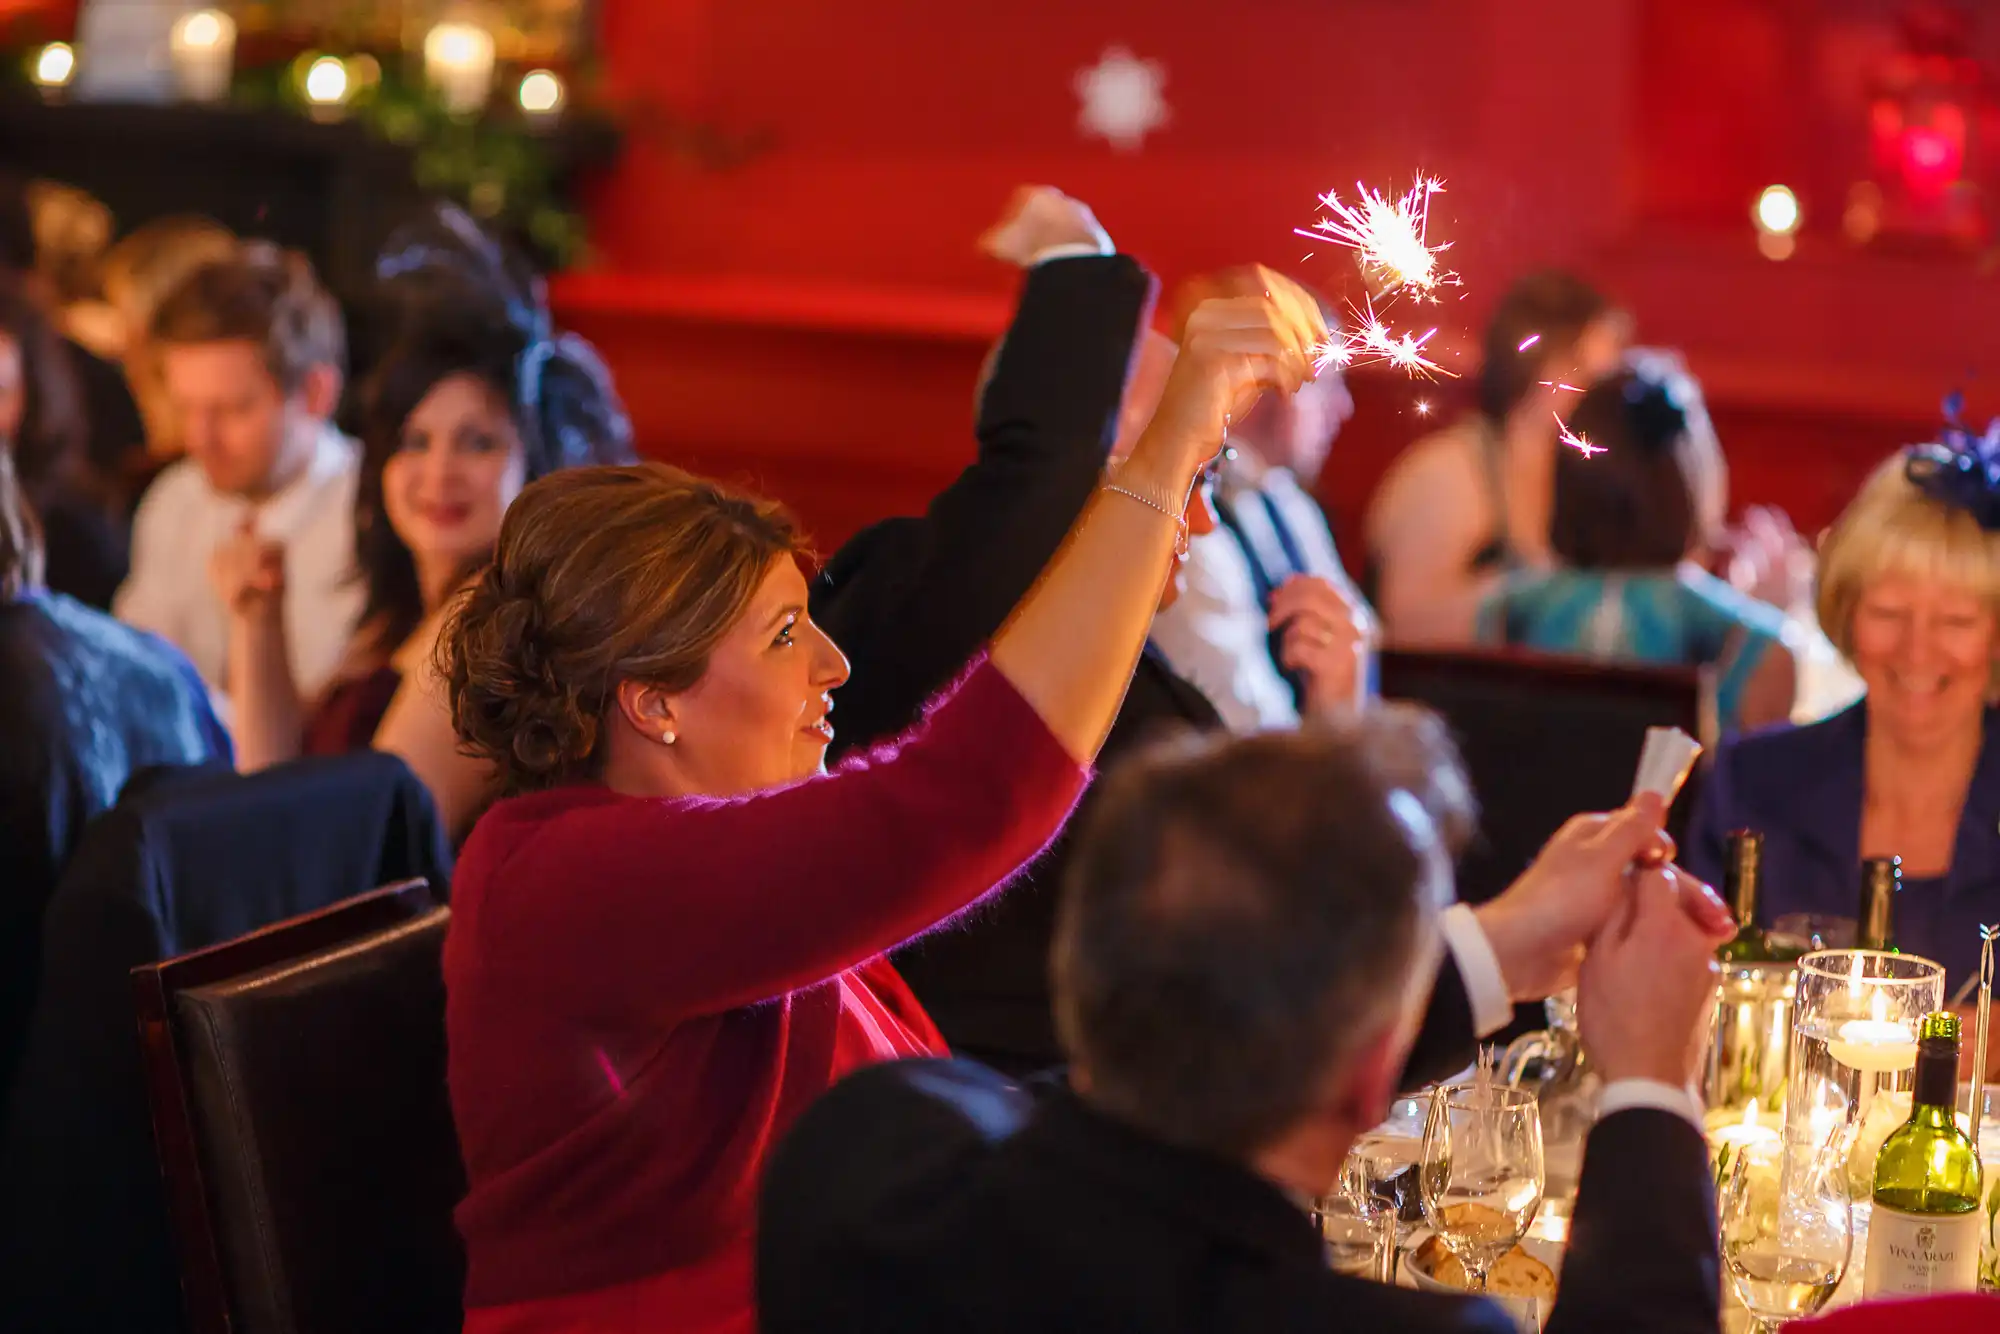 Woman holding a sparkler aloft at a festive dinner party, surrounded by guests in a warmly lit room.